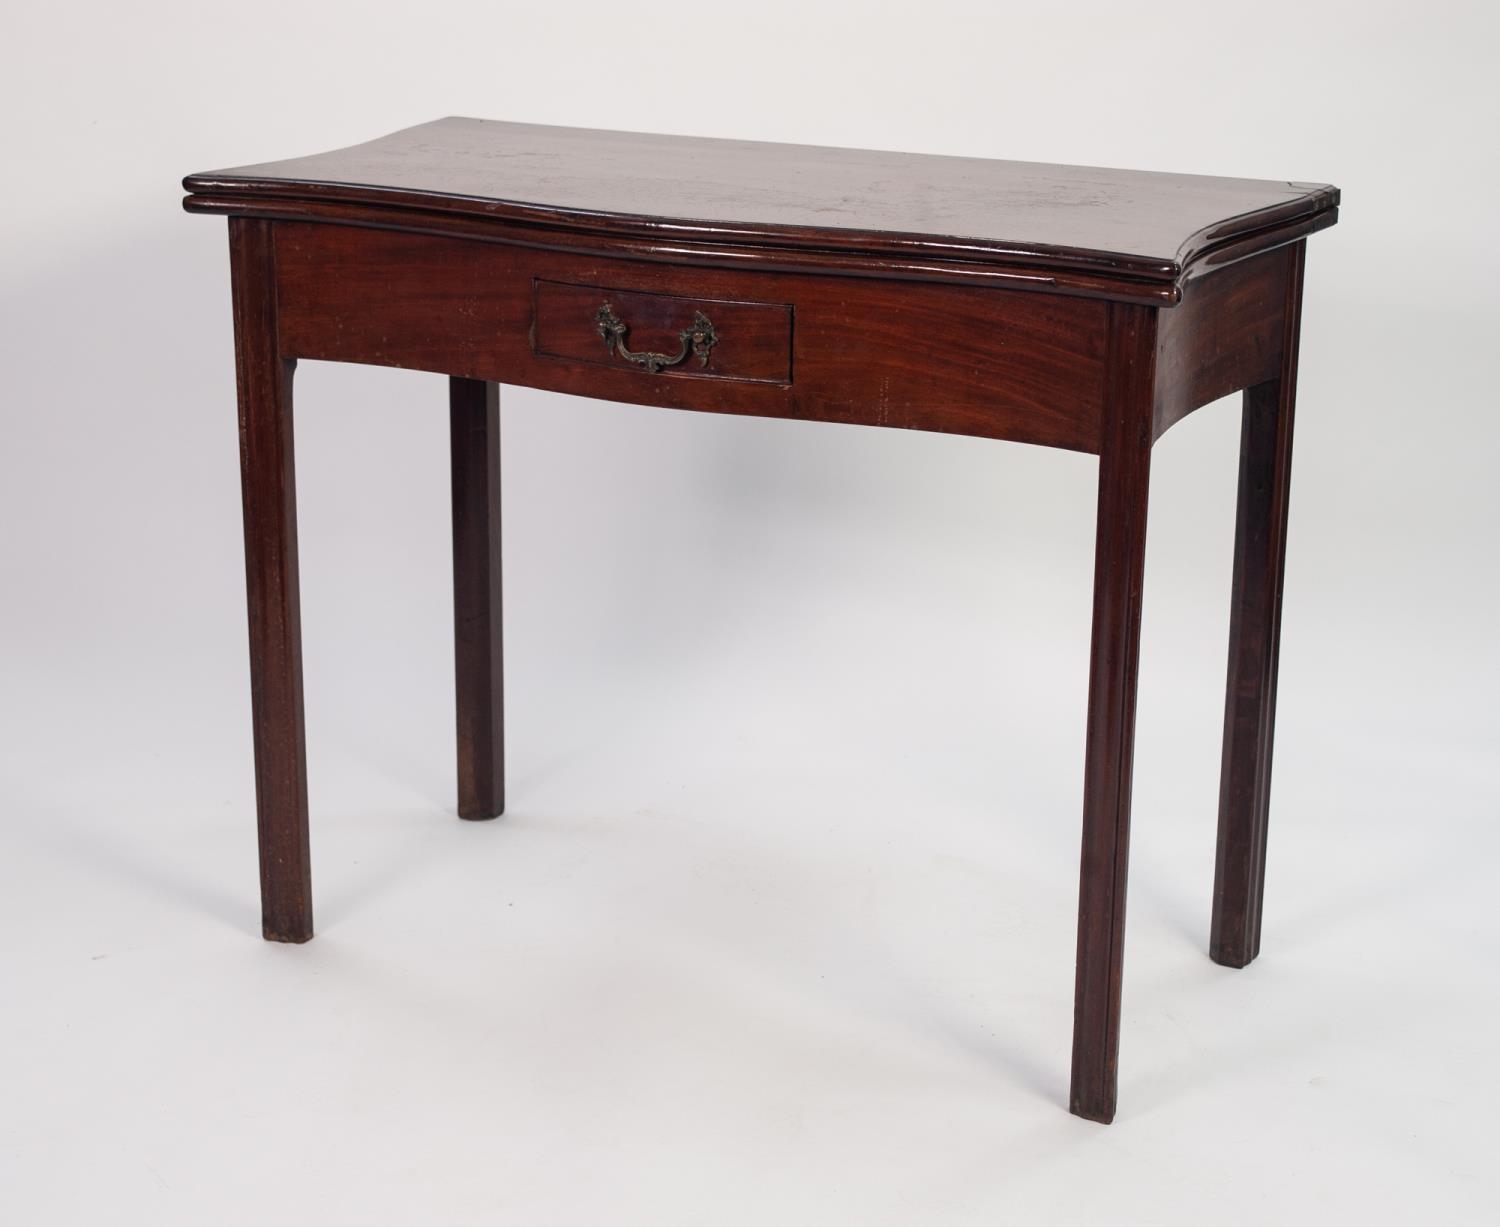 GEORGE III SERPENTINE FRONTED MAHOGANY TEA TABLE, the shaped, fold-over top above a small cockbeaded